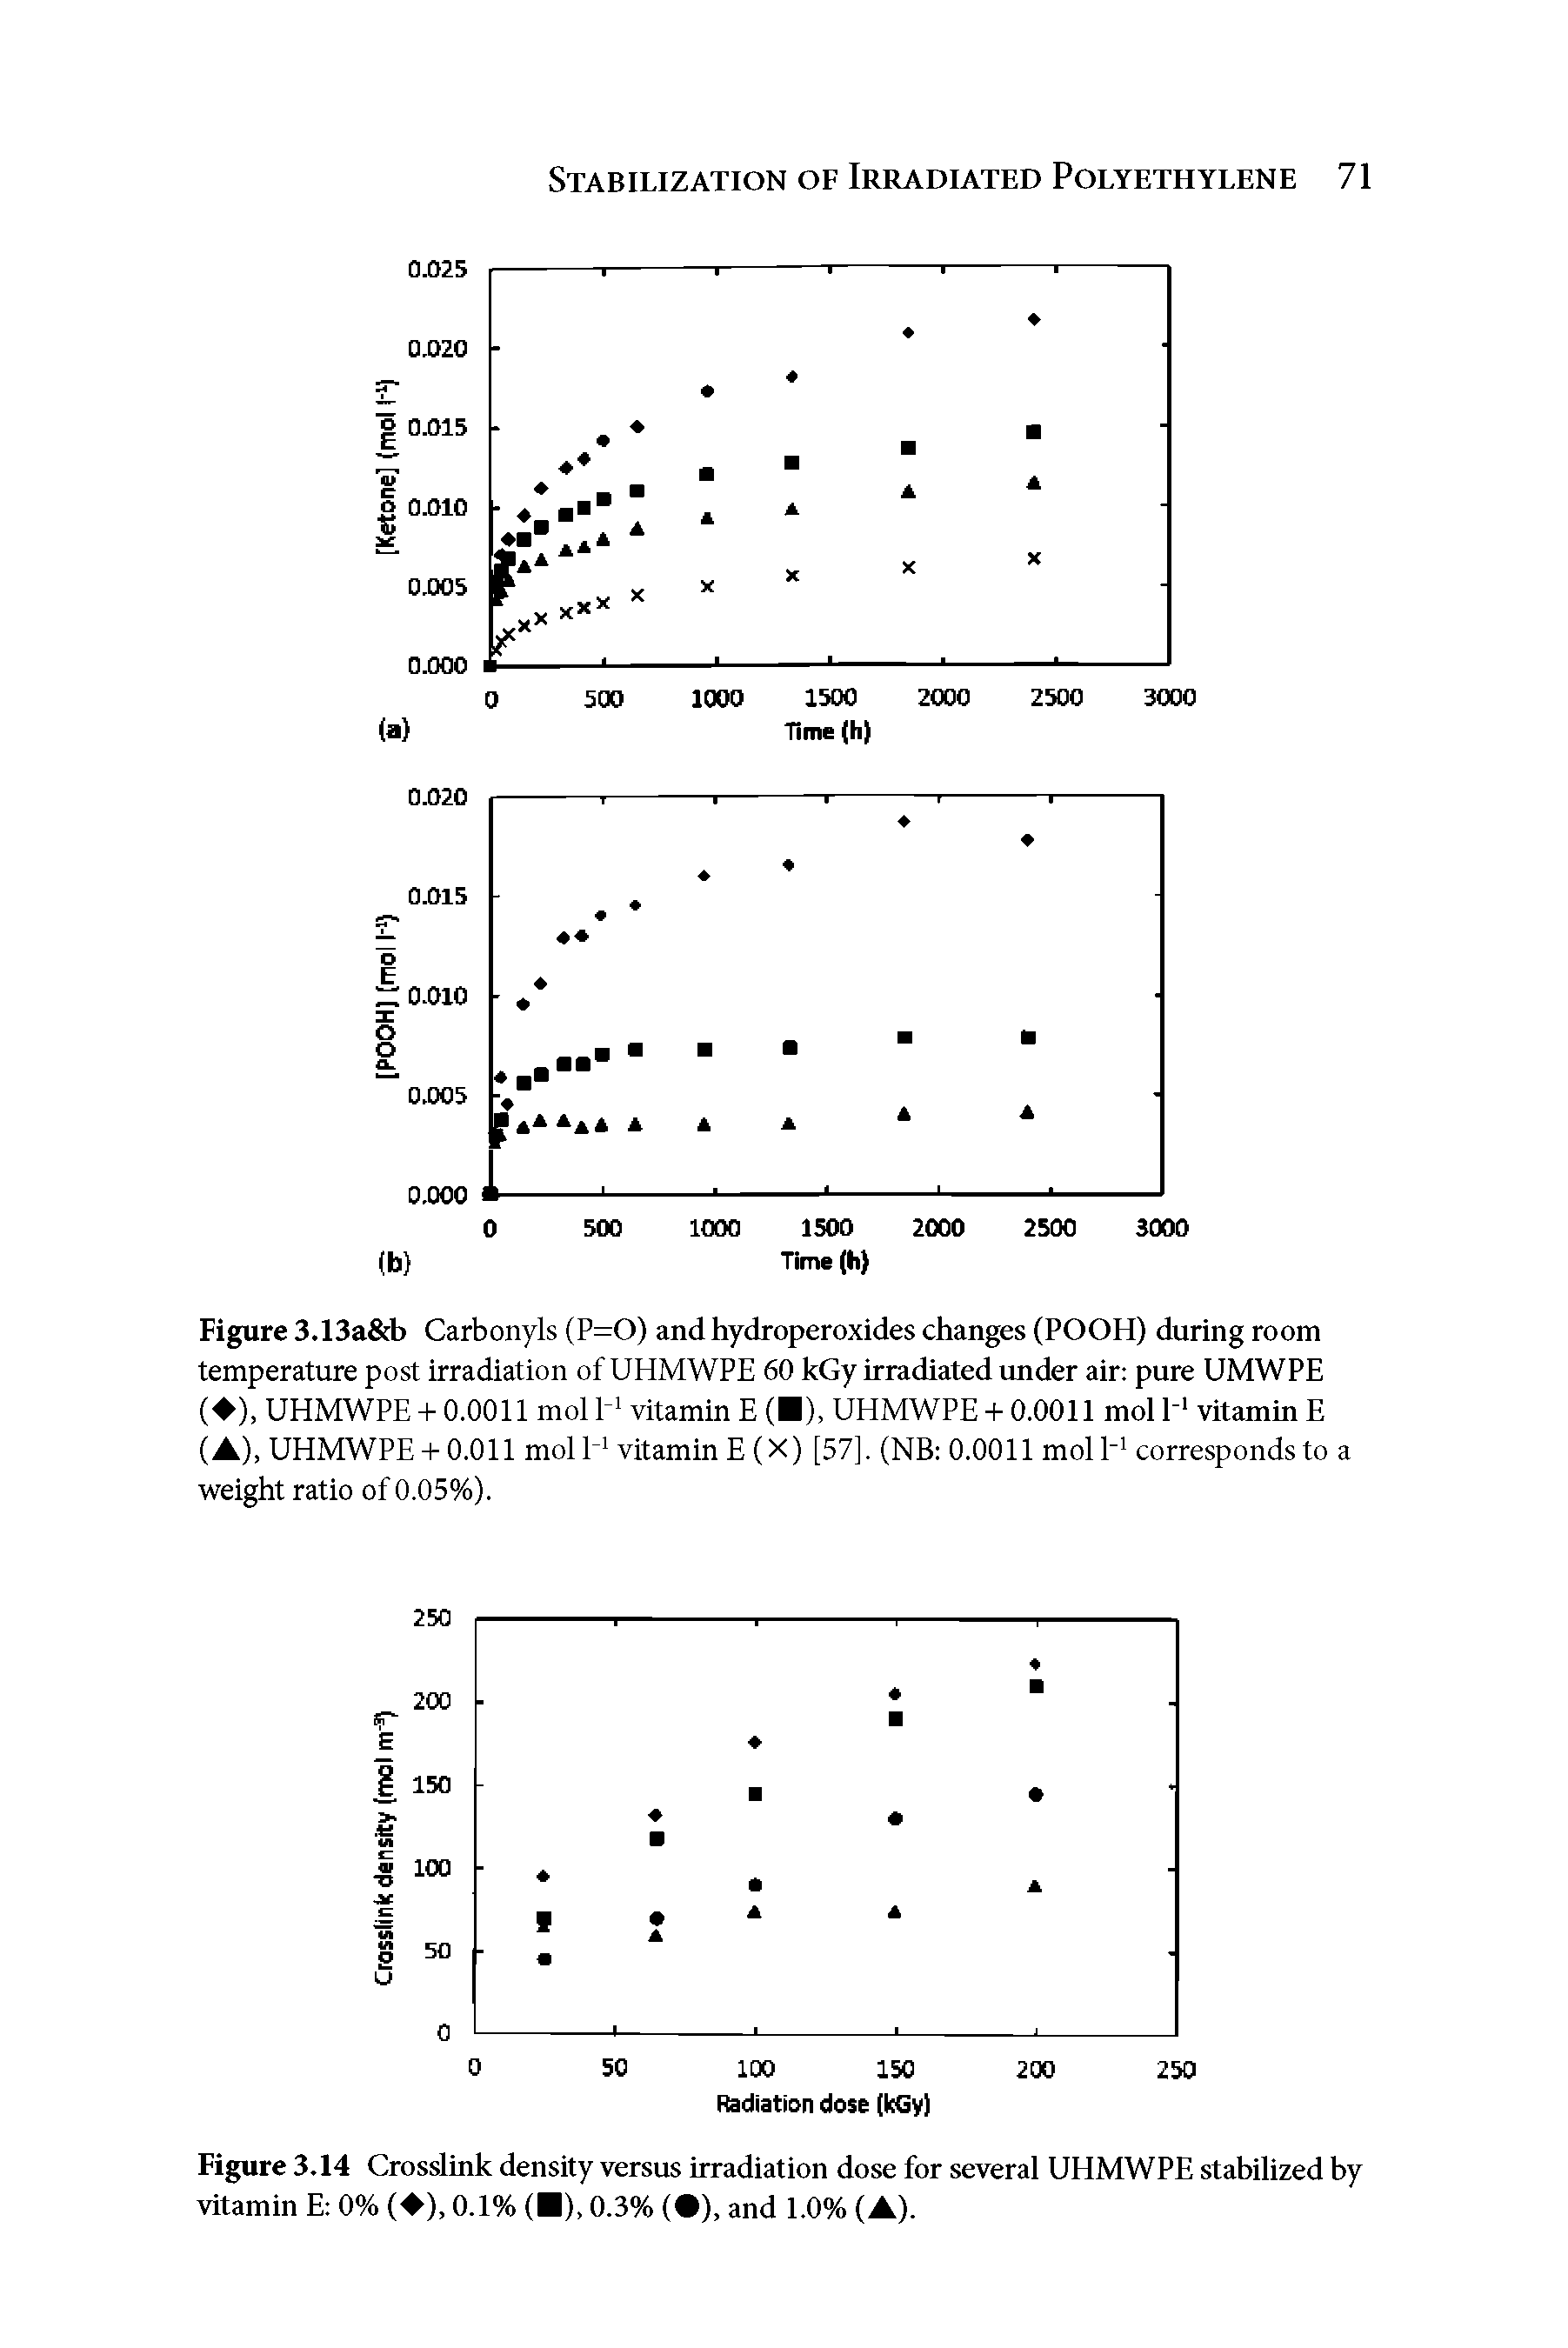 Figure 3.14 Crosslink density versus irradiation dose for several UHMWPE stabilized by vitamin E 0% ( ), 0.1% ( ), 0.3% ( ), and 1.0% (A).